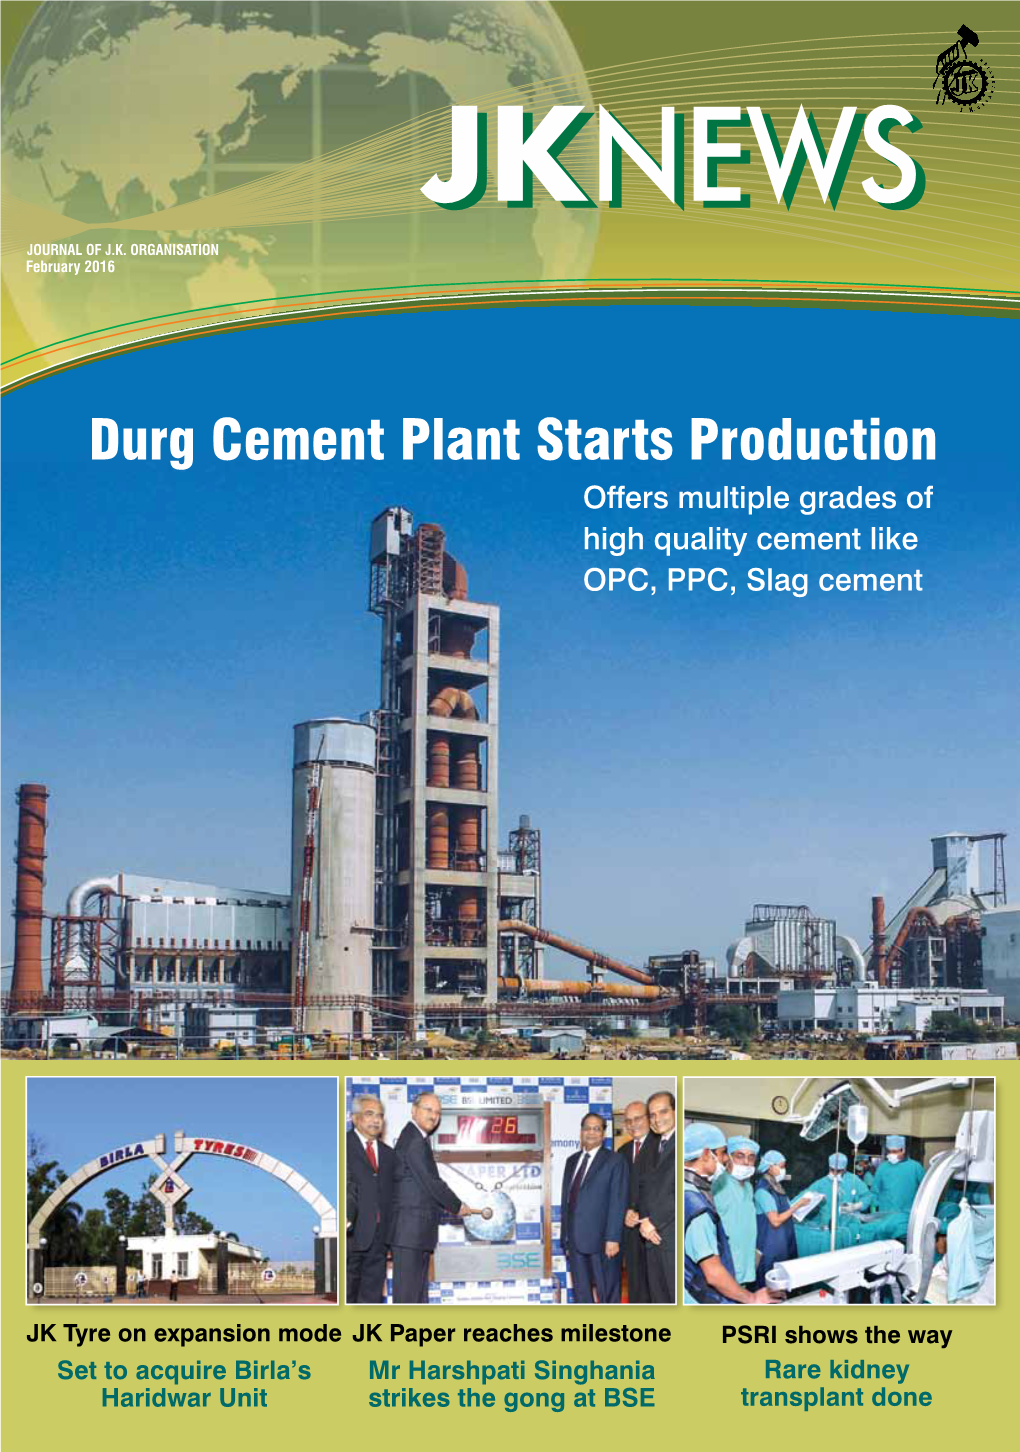 Durg Cement Plant Starts Production Offers Multiple Grades of High Quality Cement Like OPC, PPC, Slag Cement